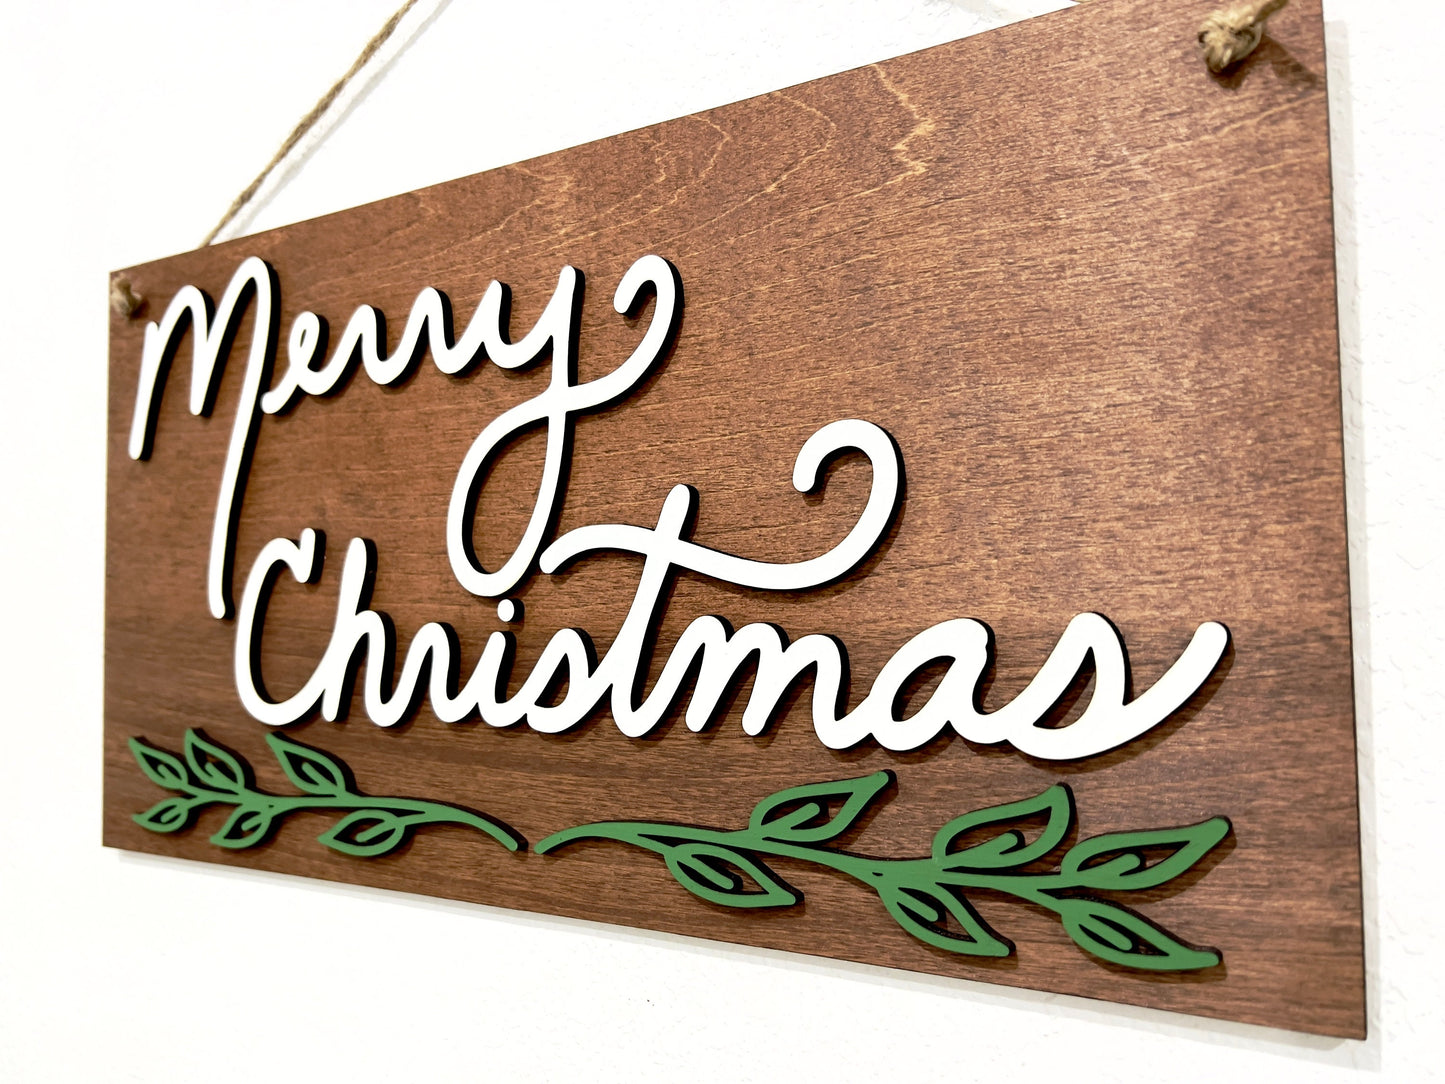 Merry Christmas sign, farmhouse holiday decor, winter snowflakes signs, country decorations, 3D rustic Christmas wall hanging greenery leaf